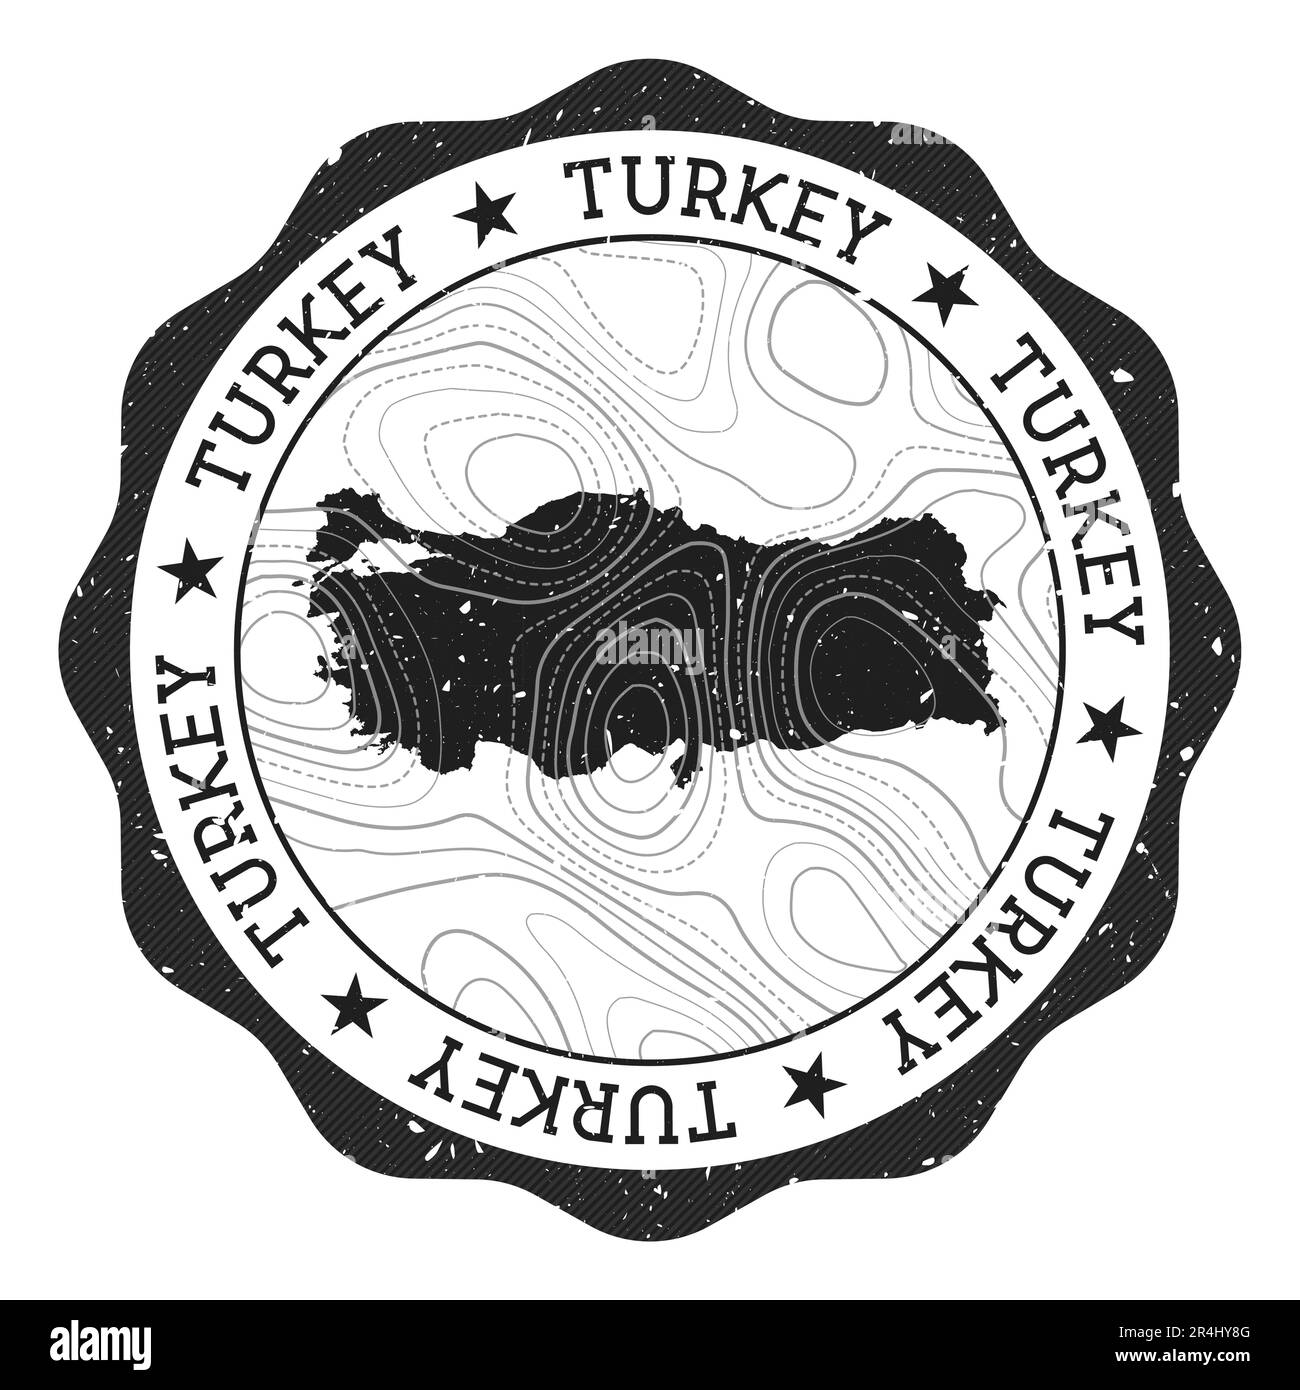 Turkey outdoor stamp. Round sticker with map of country with topographic isolines. Vector illustration. Can be used as insignia, logotype, label, stic Stock Vector